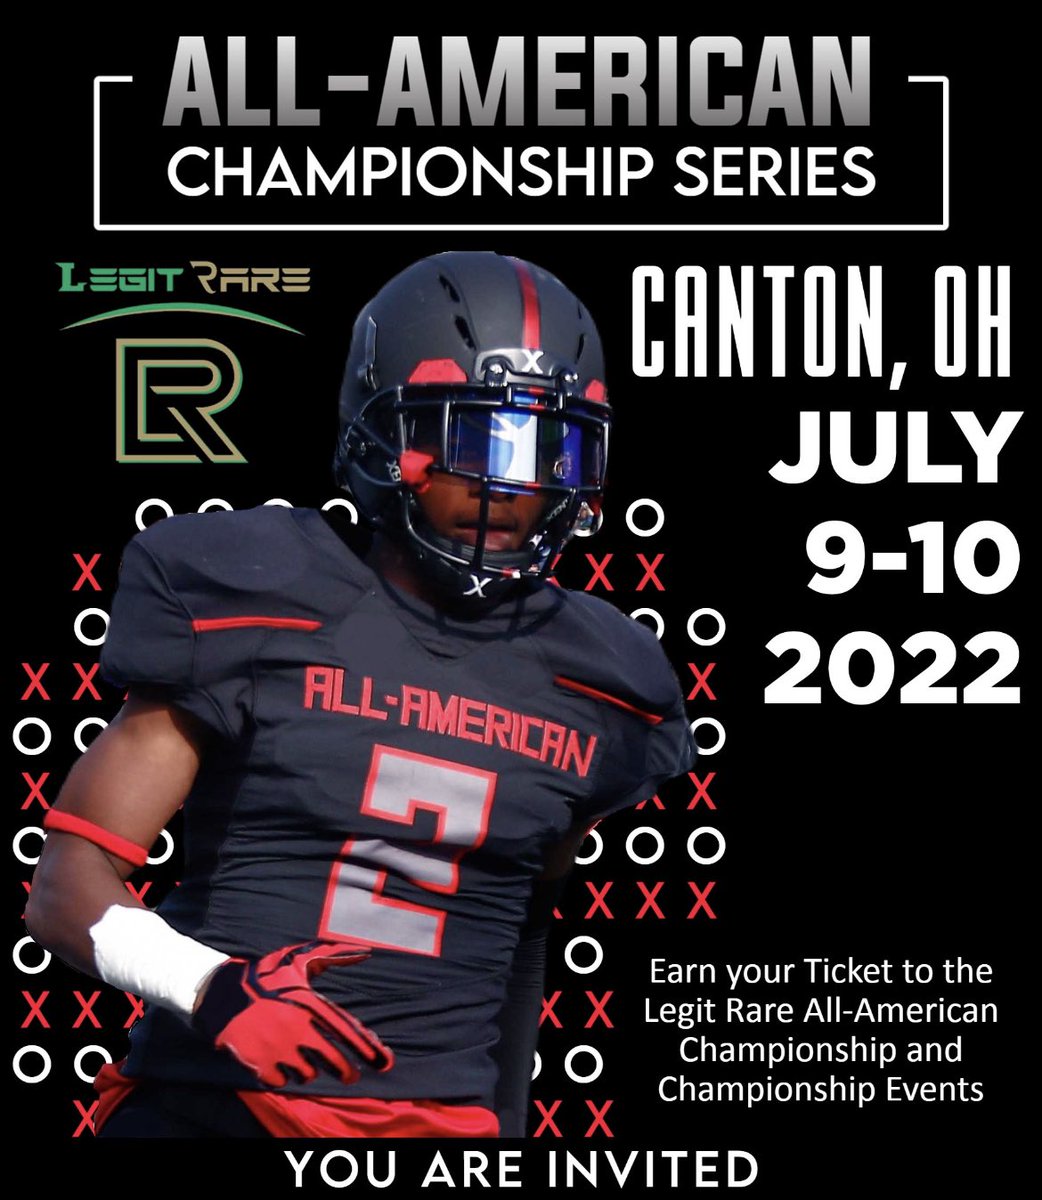 Blessed to receive an invite to the All American Championship series @LegitRare